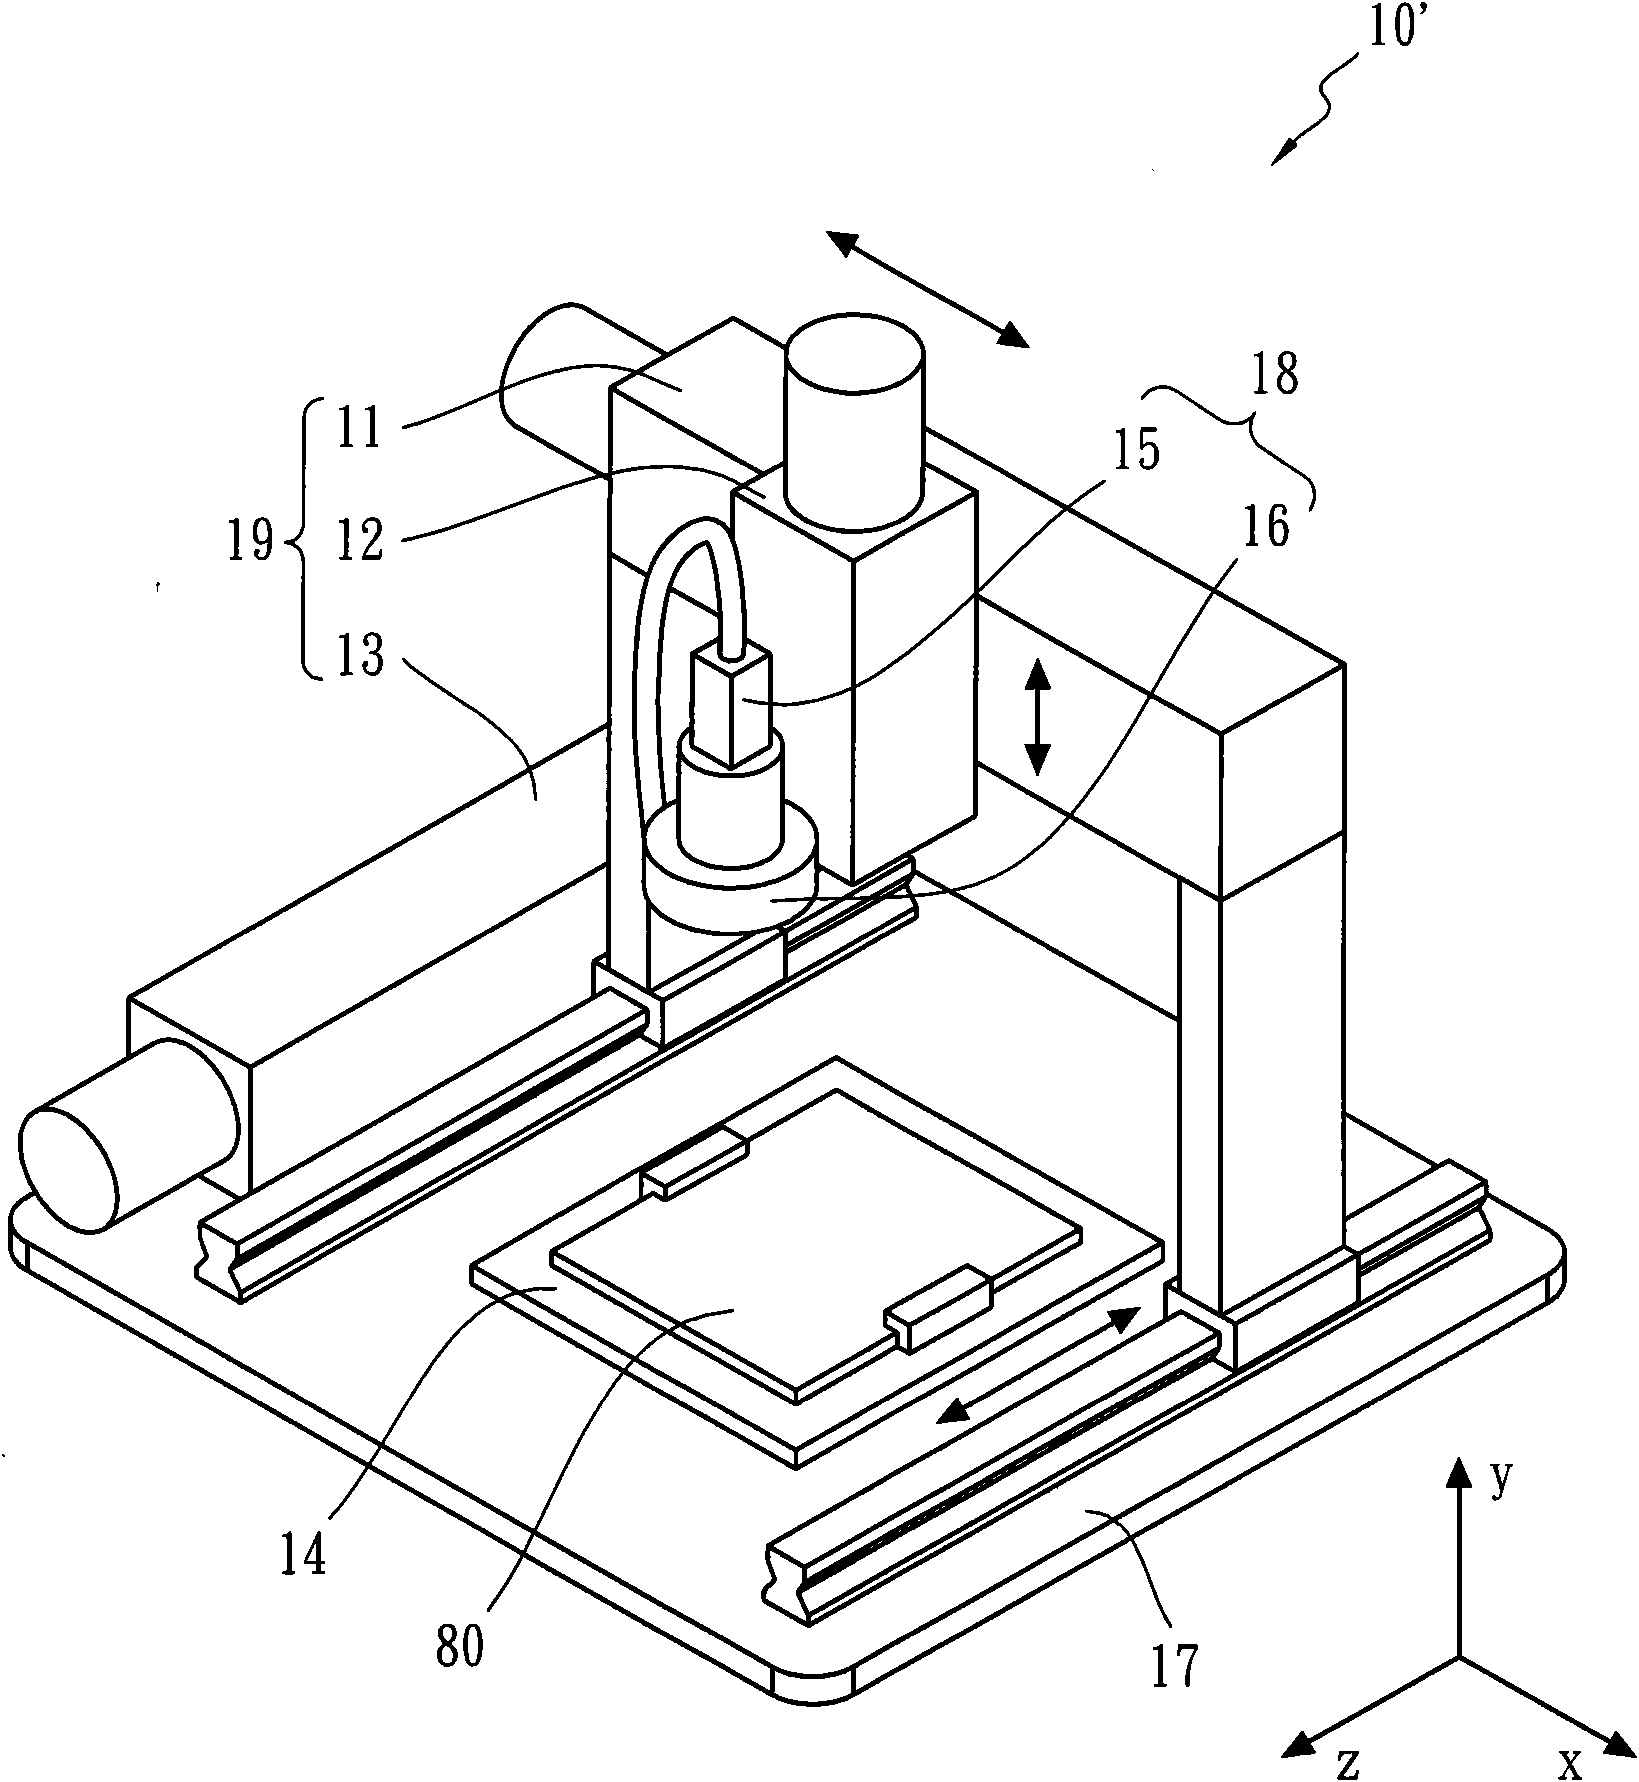 Quadratic element optical measuring device capable of continuously conveying objects to be measured